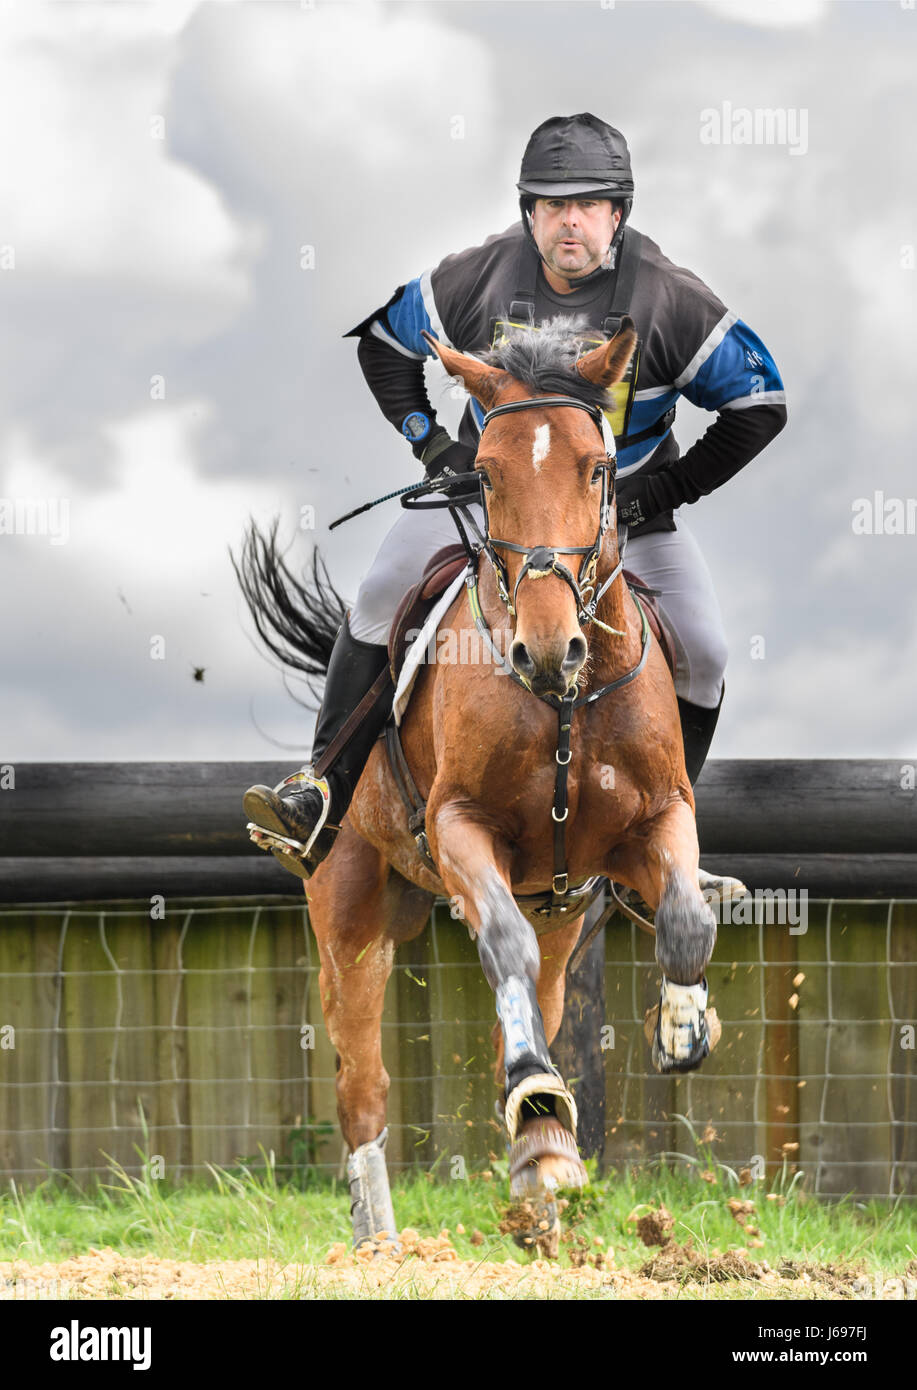 Rockingham Castle grounds, Corby, England. Saturday 20th May 2017. An unnamed spanish rider and his horse leap an obstacle in the cross country phase of the Rockingham International Horse Trials on Saturday 20th May 2017 in the grounds of the norman Rockingham castle at Corby, England. Credit: miscellany/Alamy Live News Stock Photo